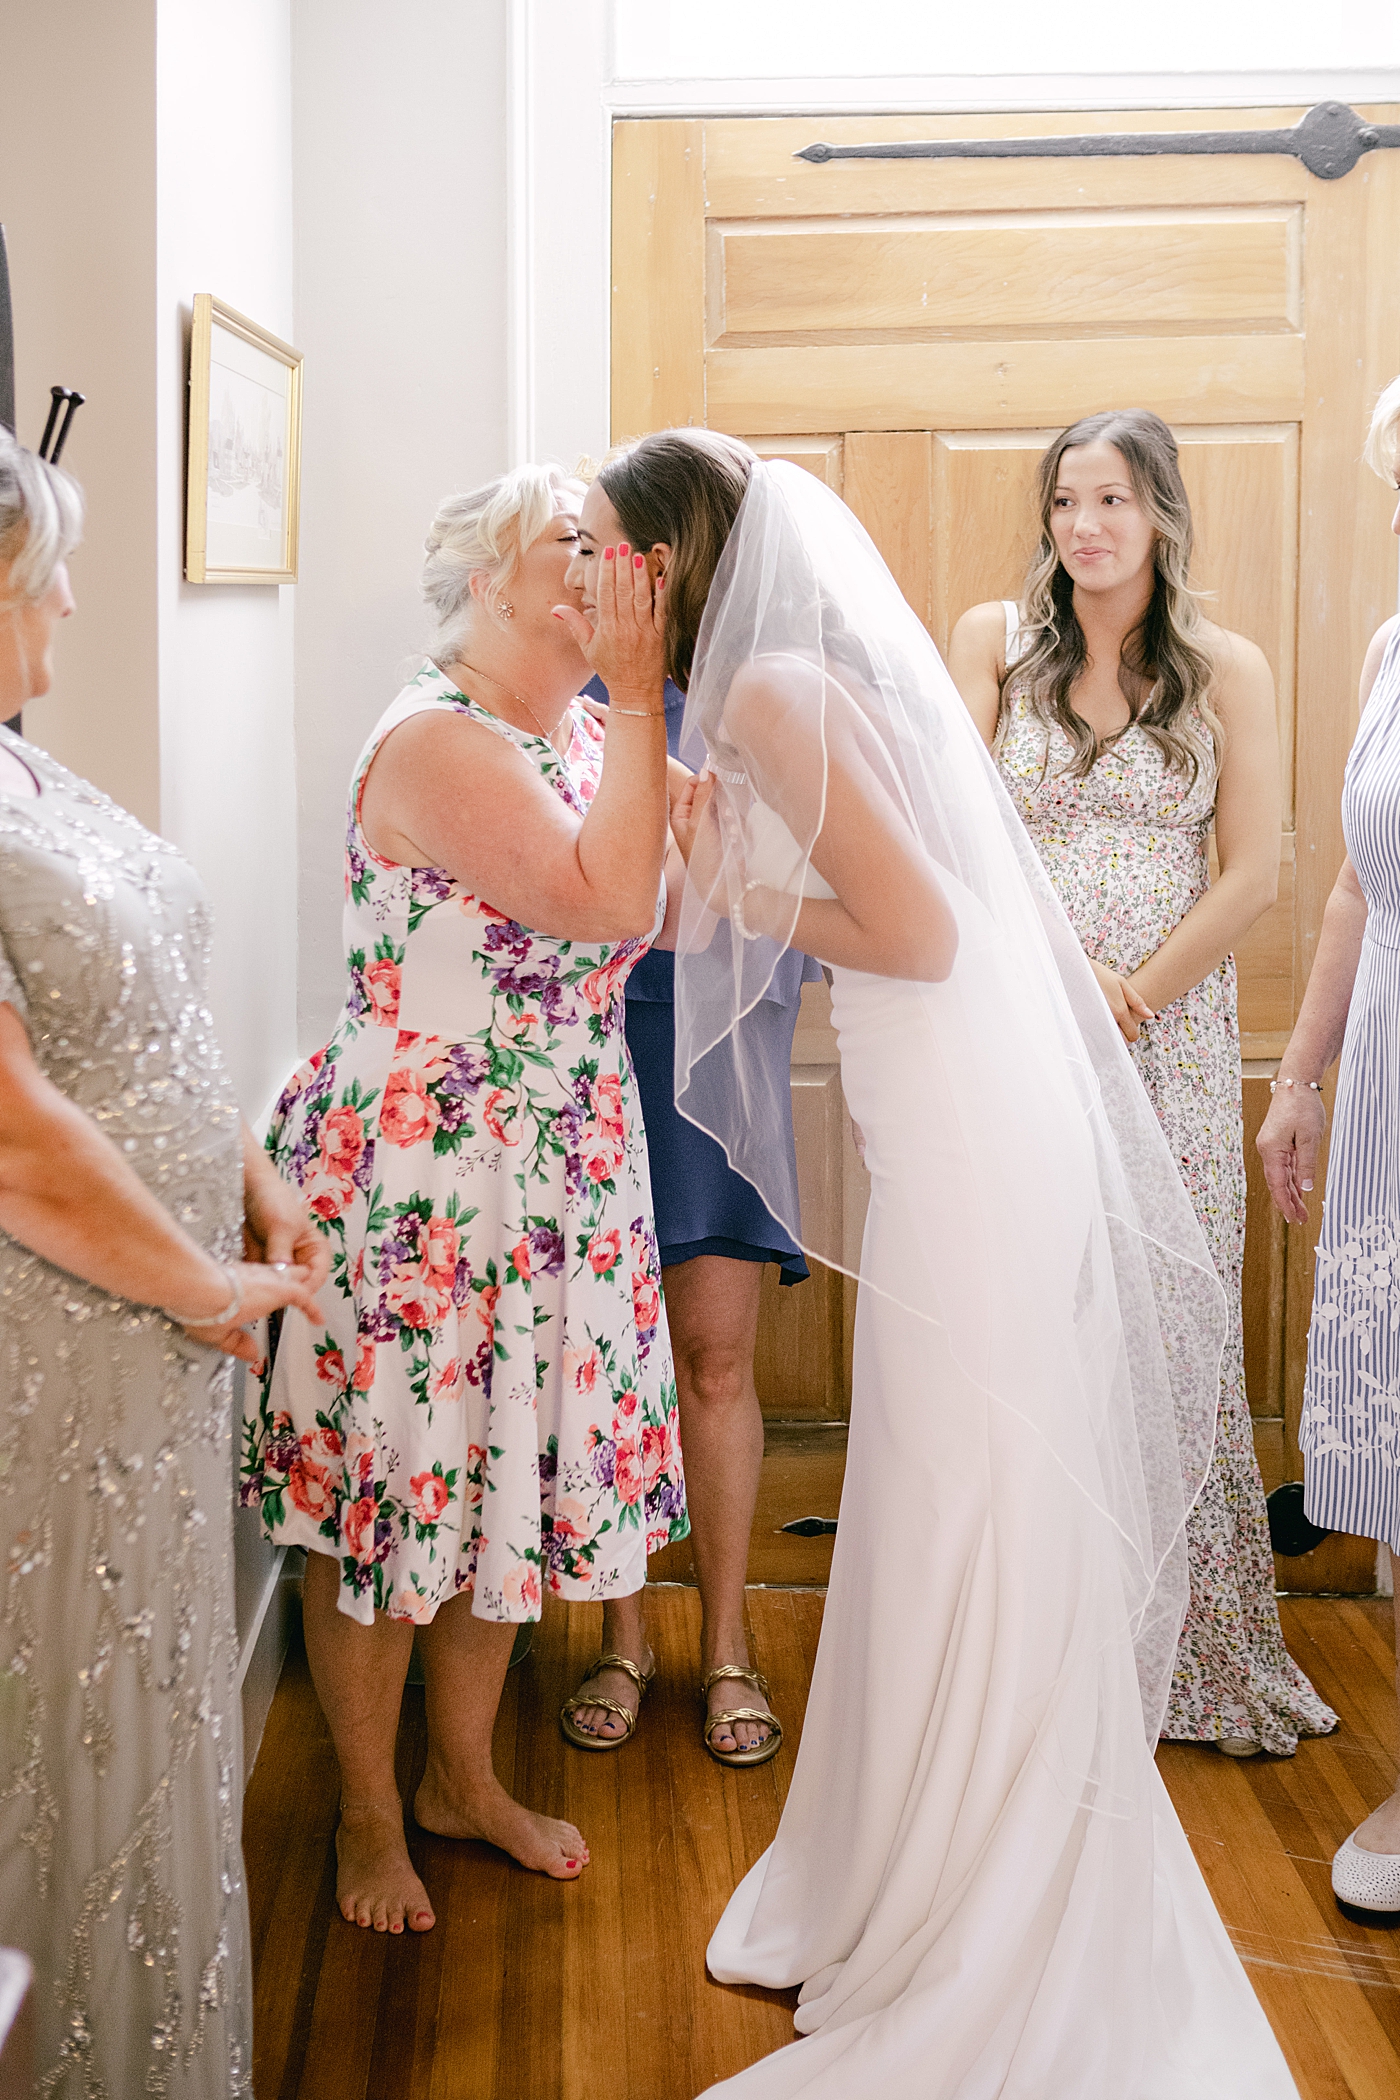 Bride greeting her family | Image by Hudson Valley Wedding Photographer Hope Helmuth